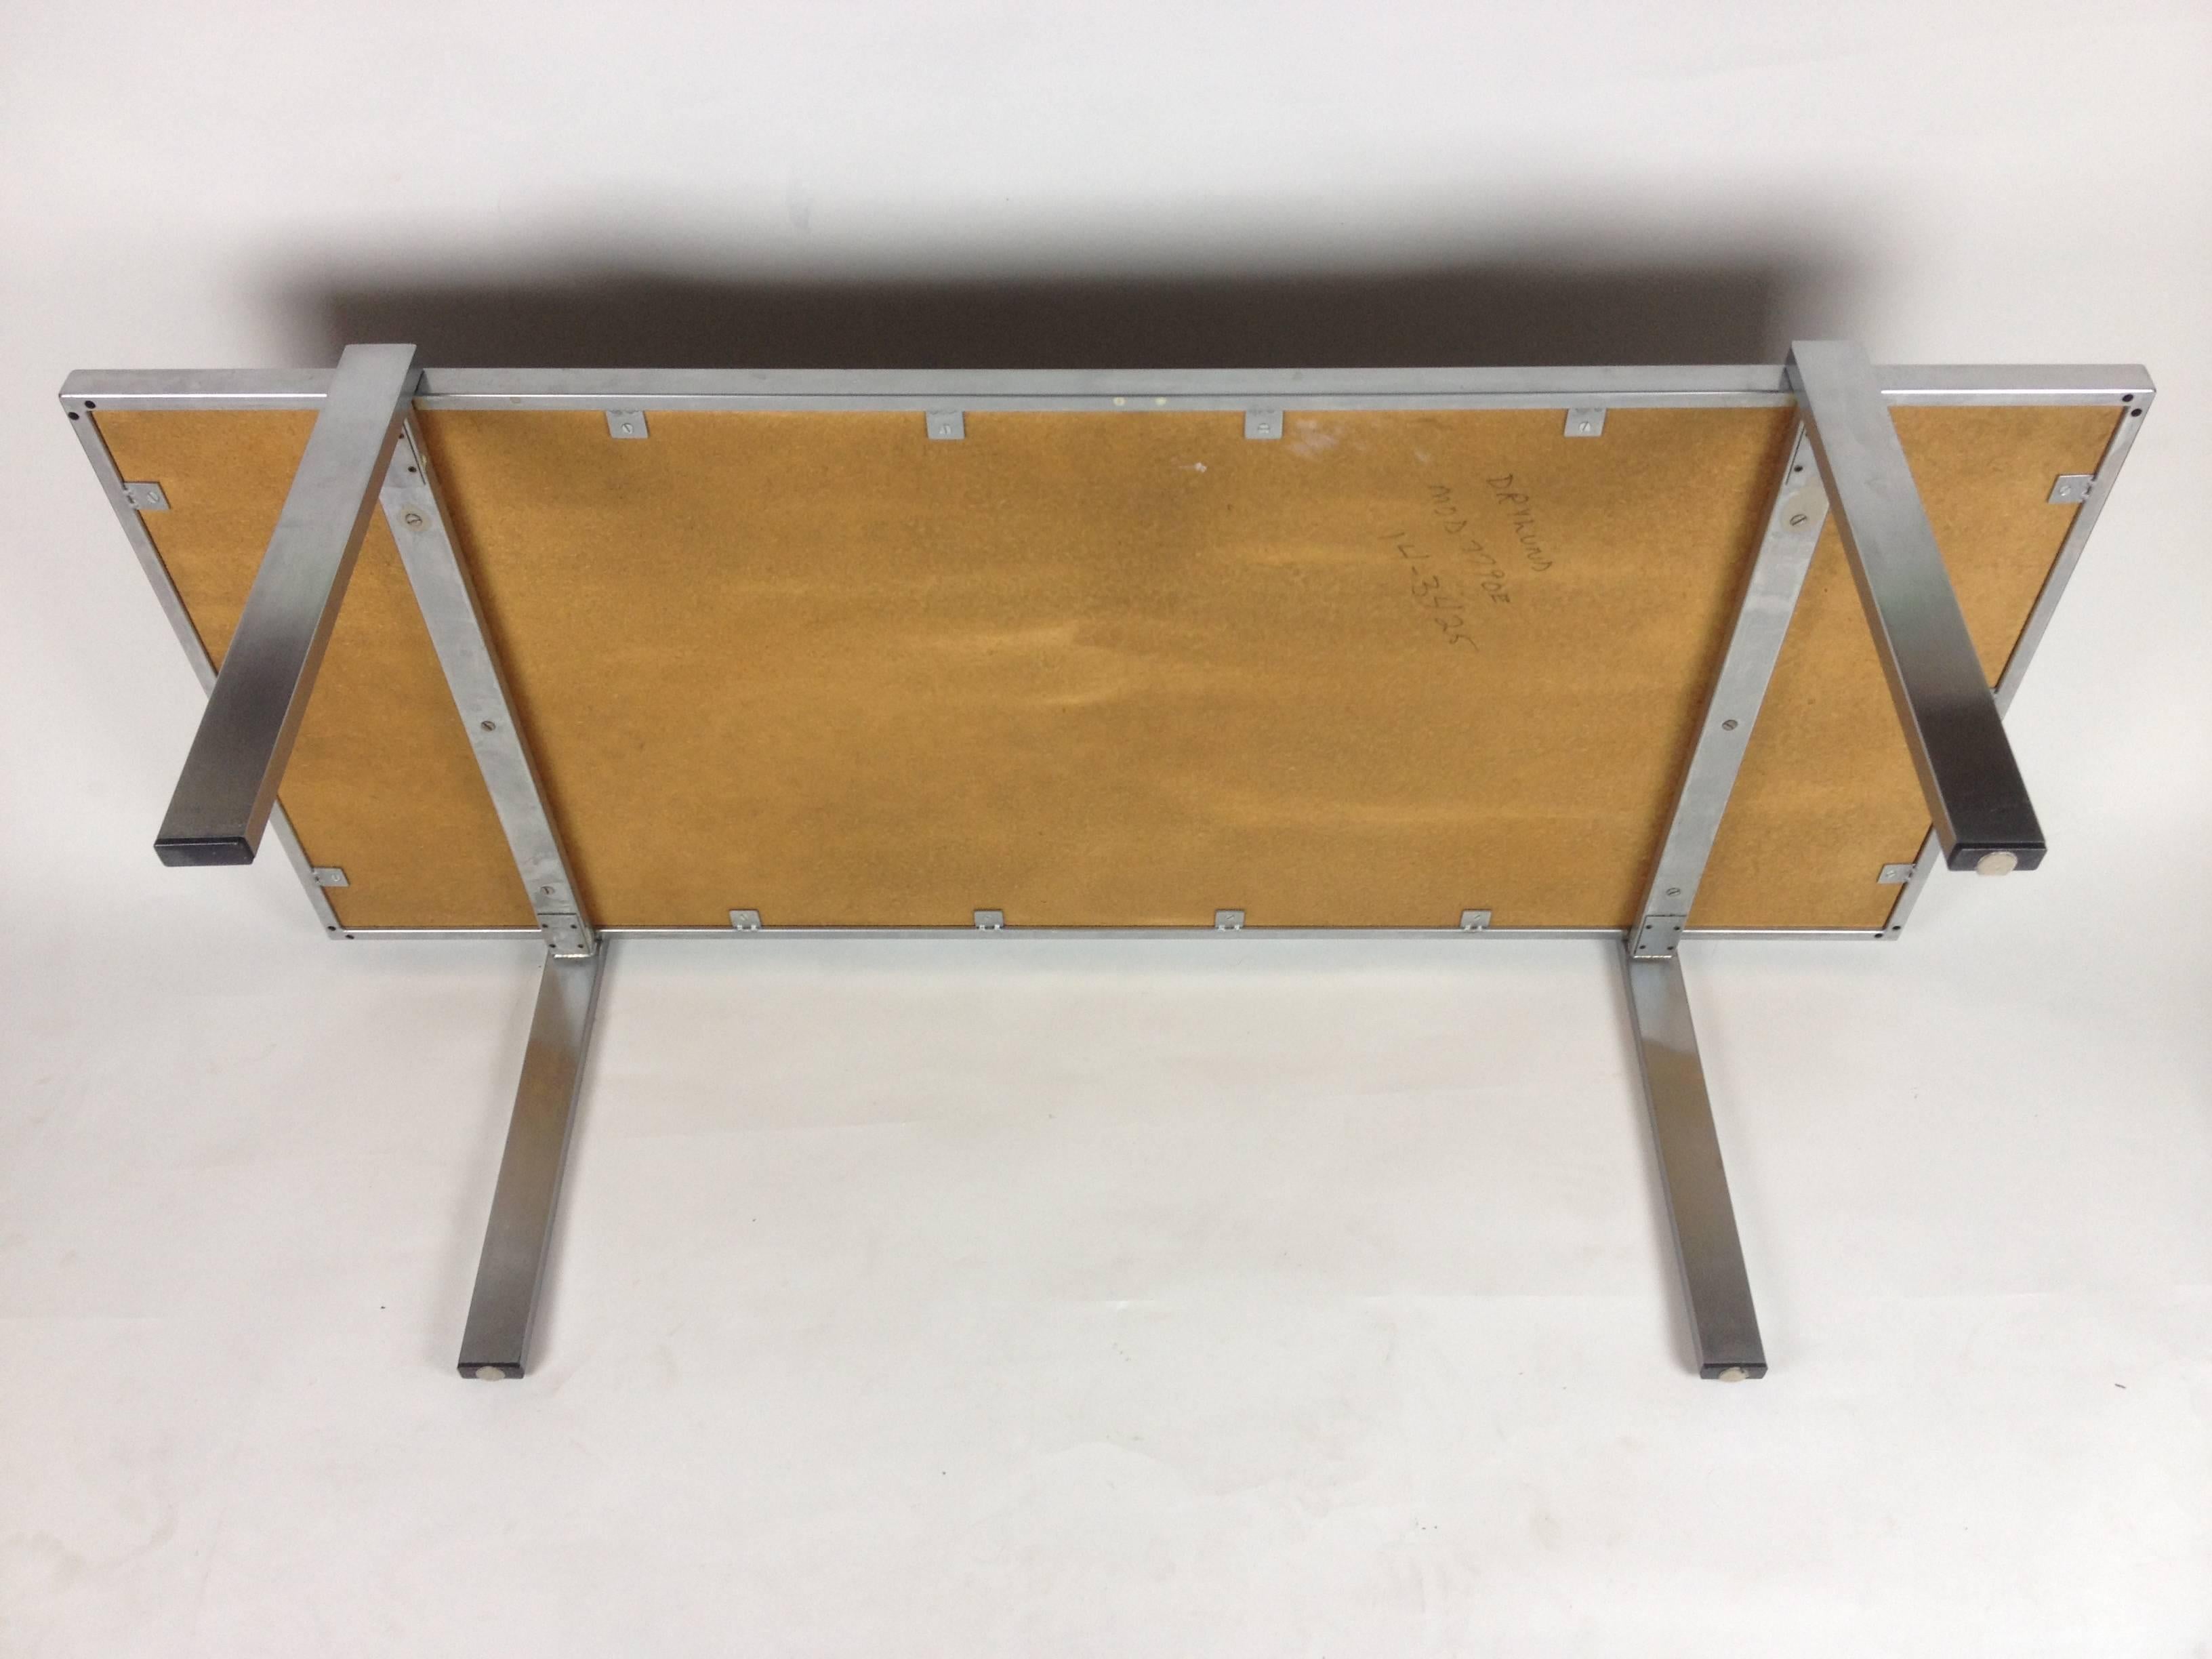 Incredible Rare Danish Modern Ox Art Tile & Metal Coffee Table, Dyrlund, Signed For Sale 1